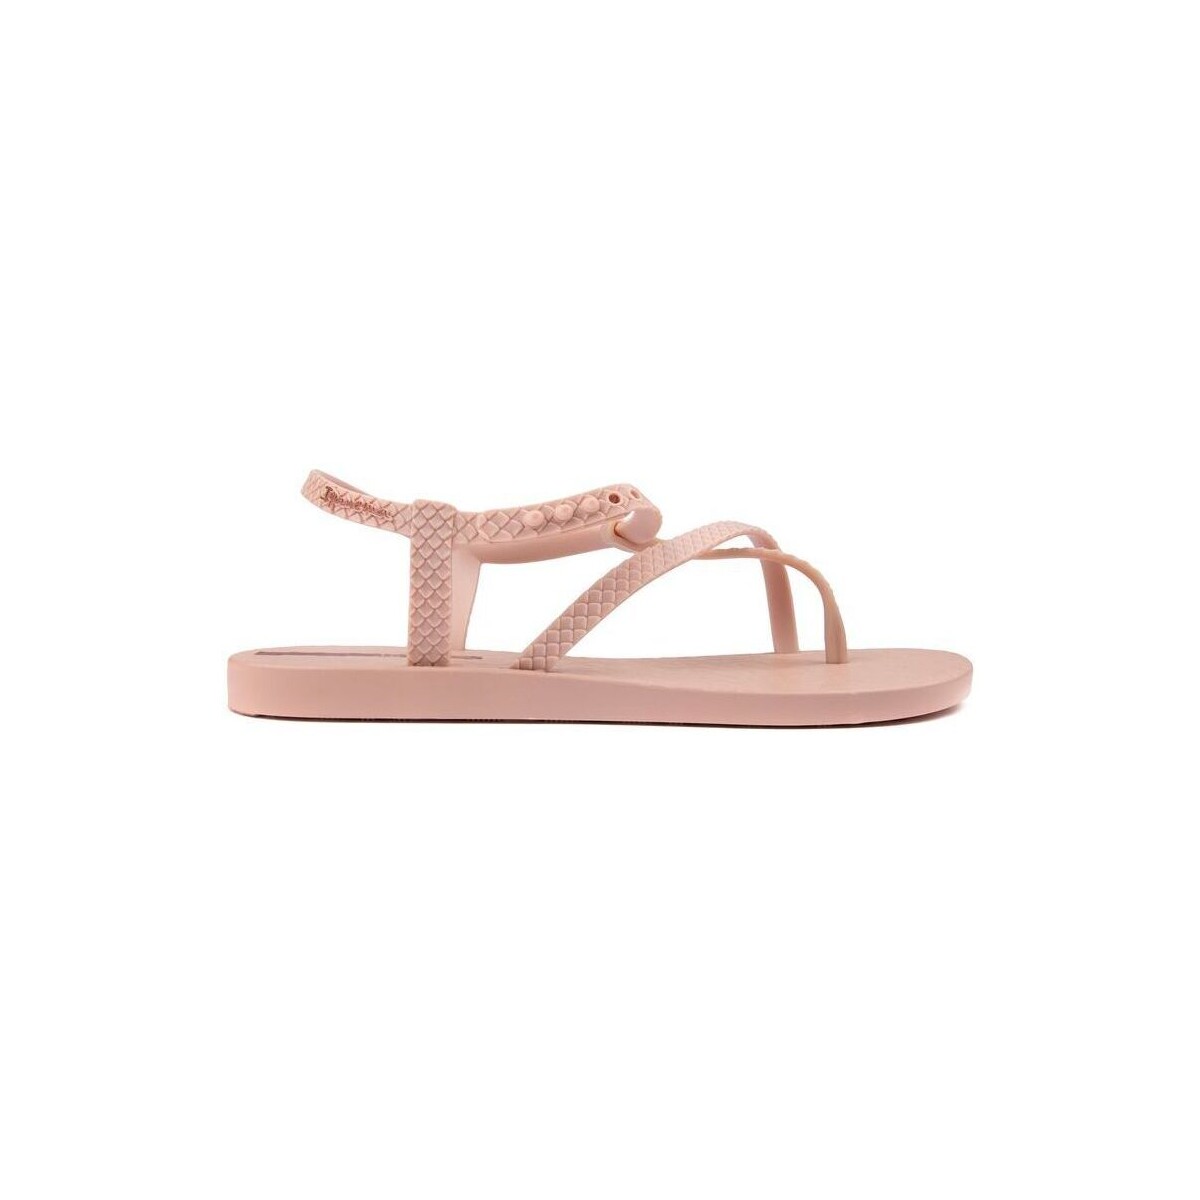 Chaussures Femme Sandales et Nu-pieds Ipanema Wish Tongs Rose